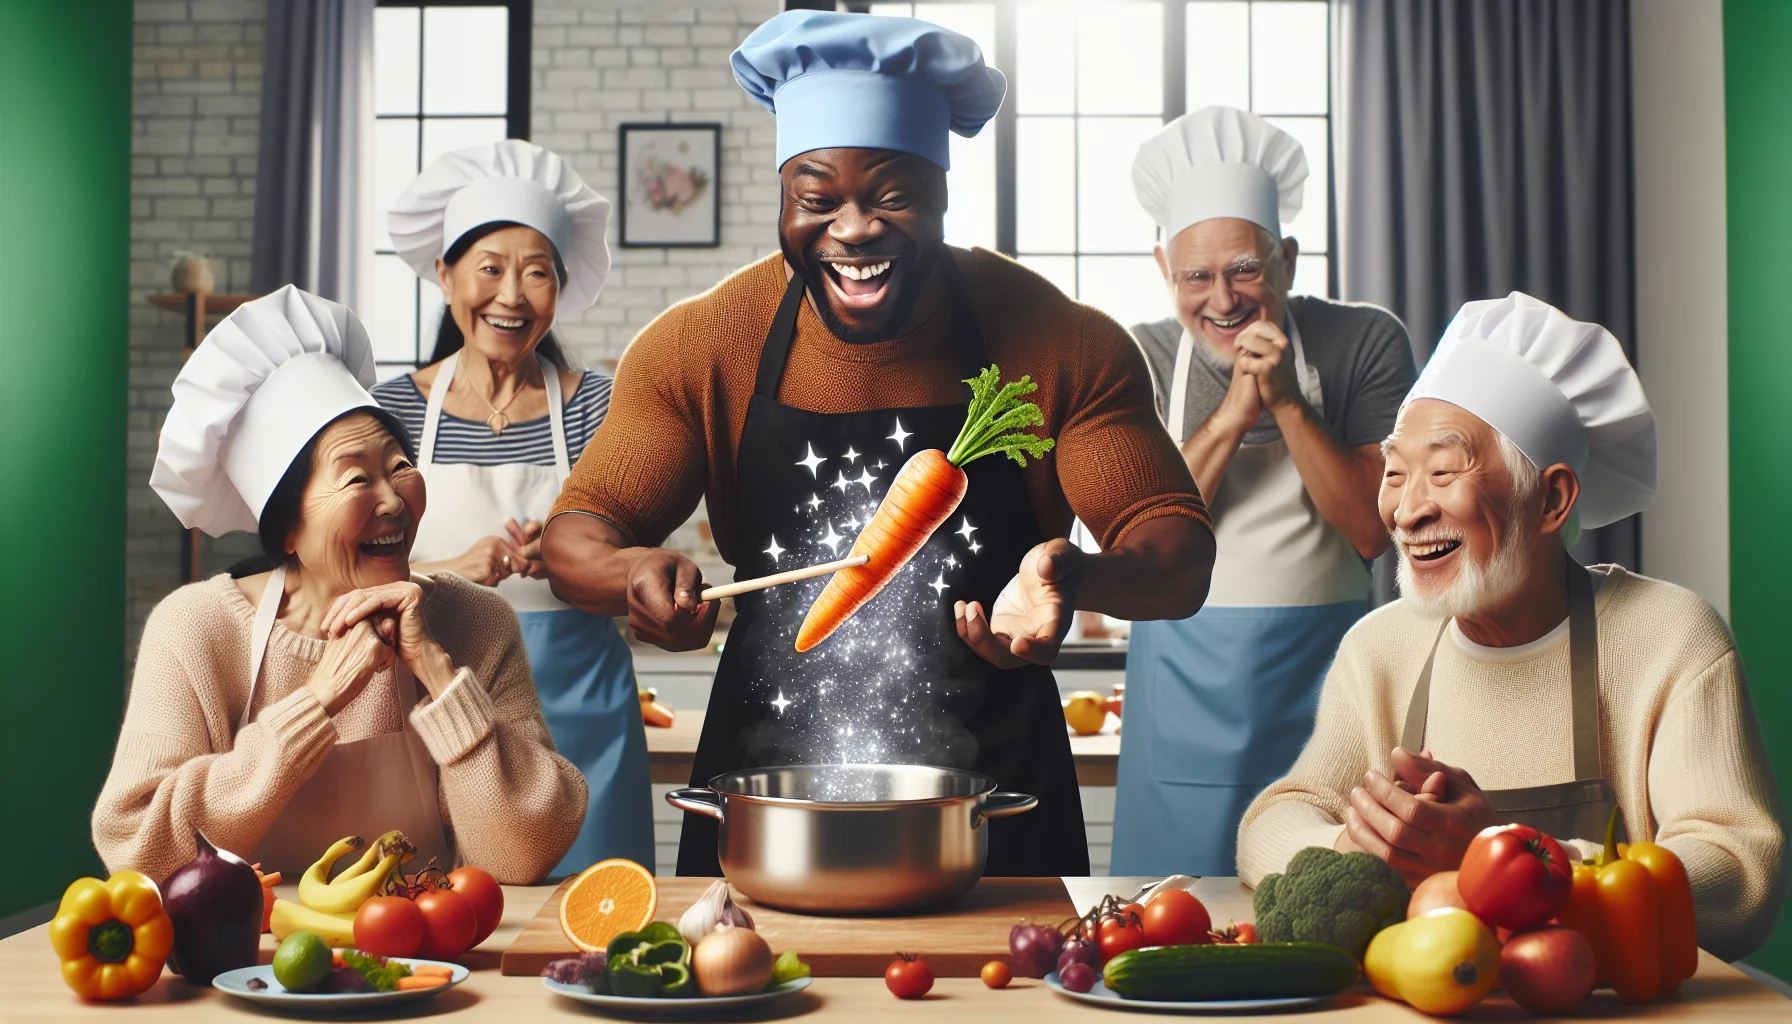 Create a humor-filled, realistic image set in a community center in Erie County, known for senior services. The scene depicts an interactive cooking class led by an energetic Black male instructor in his 60s. He's using a comically large carrot as a magic wand, with sparkles around it to emphasise the 'magic' of nutritious food. Seated around the table, an Asian woman and a Hispanic man, both elderly, are wearing oversized chef hats and aprons, chuckling at the instructor's antics. They're preparing colorful plates of healthy food with an array of fruits, vegetables and whole grains. The mood is light-hearted.